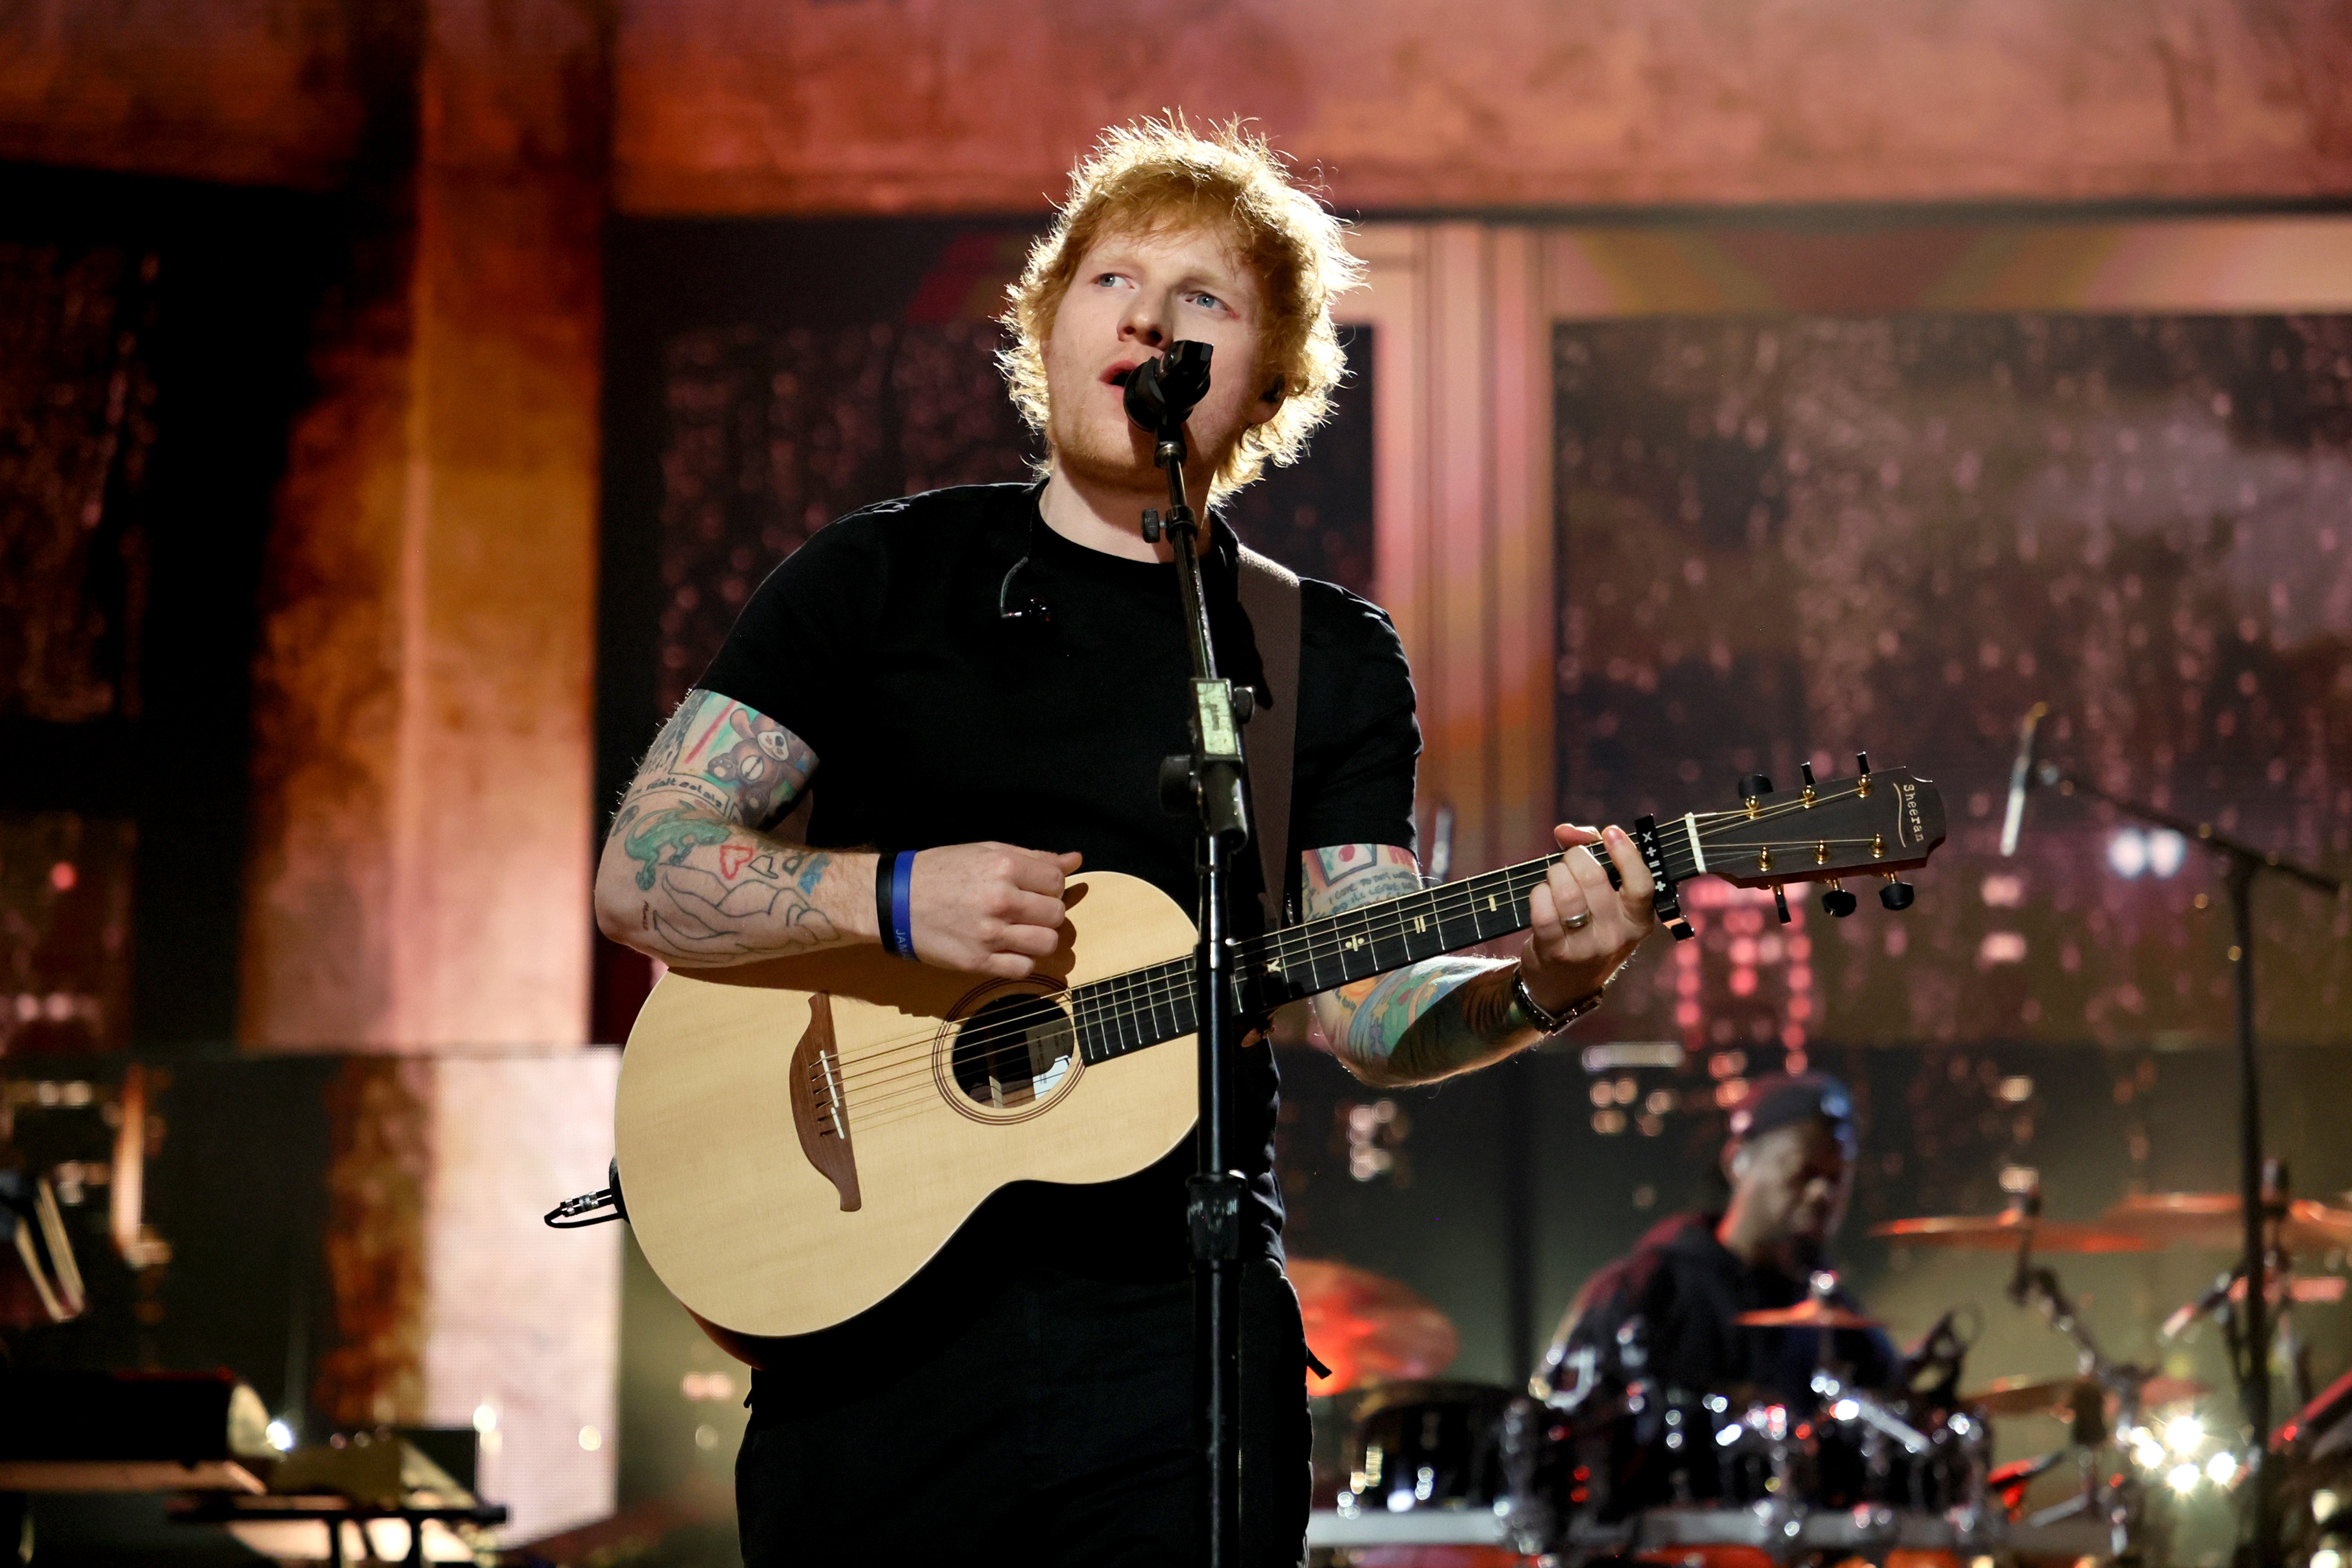 Ed Sheeran’s song ‘Don’t’ is believed to be about an ex